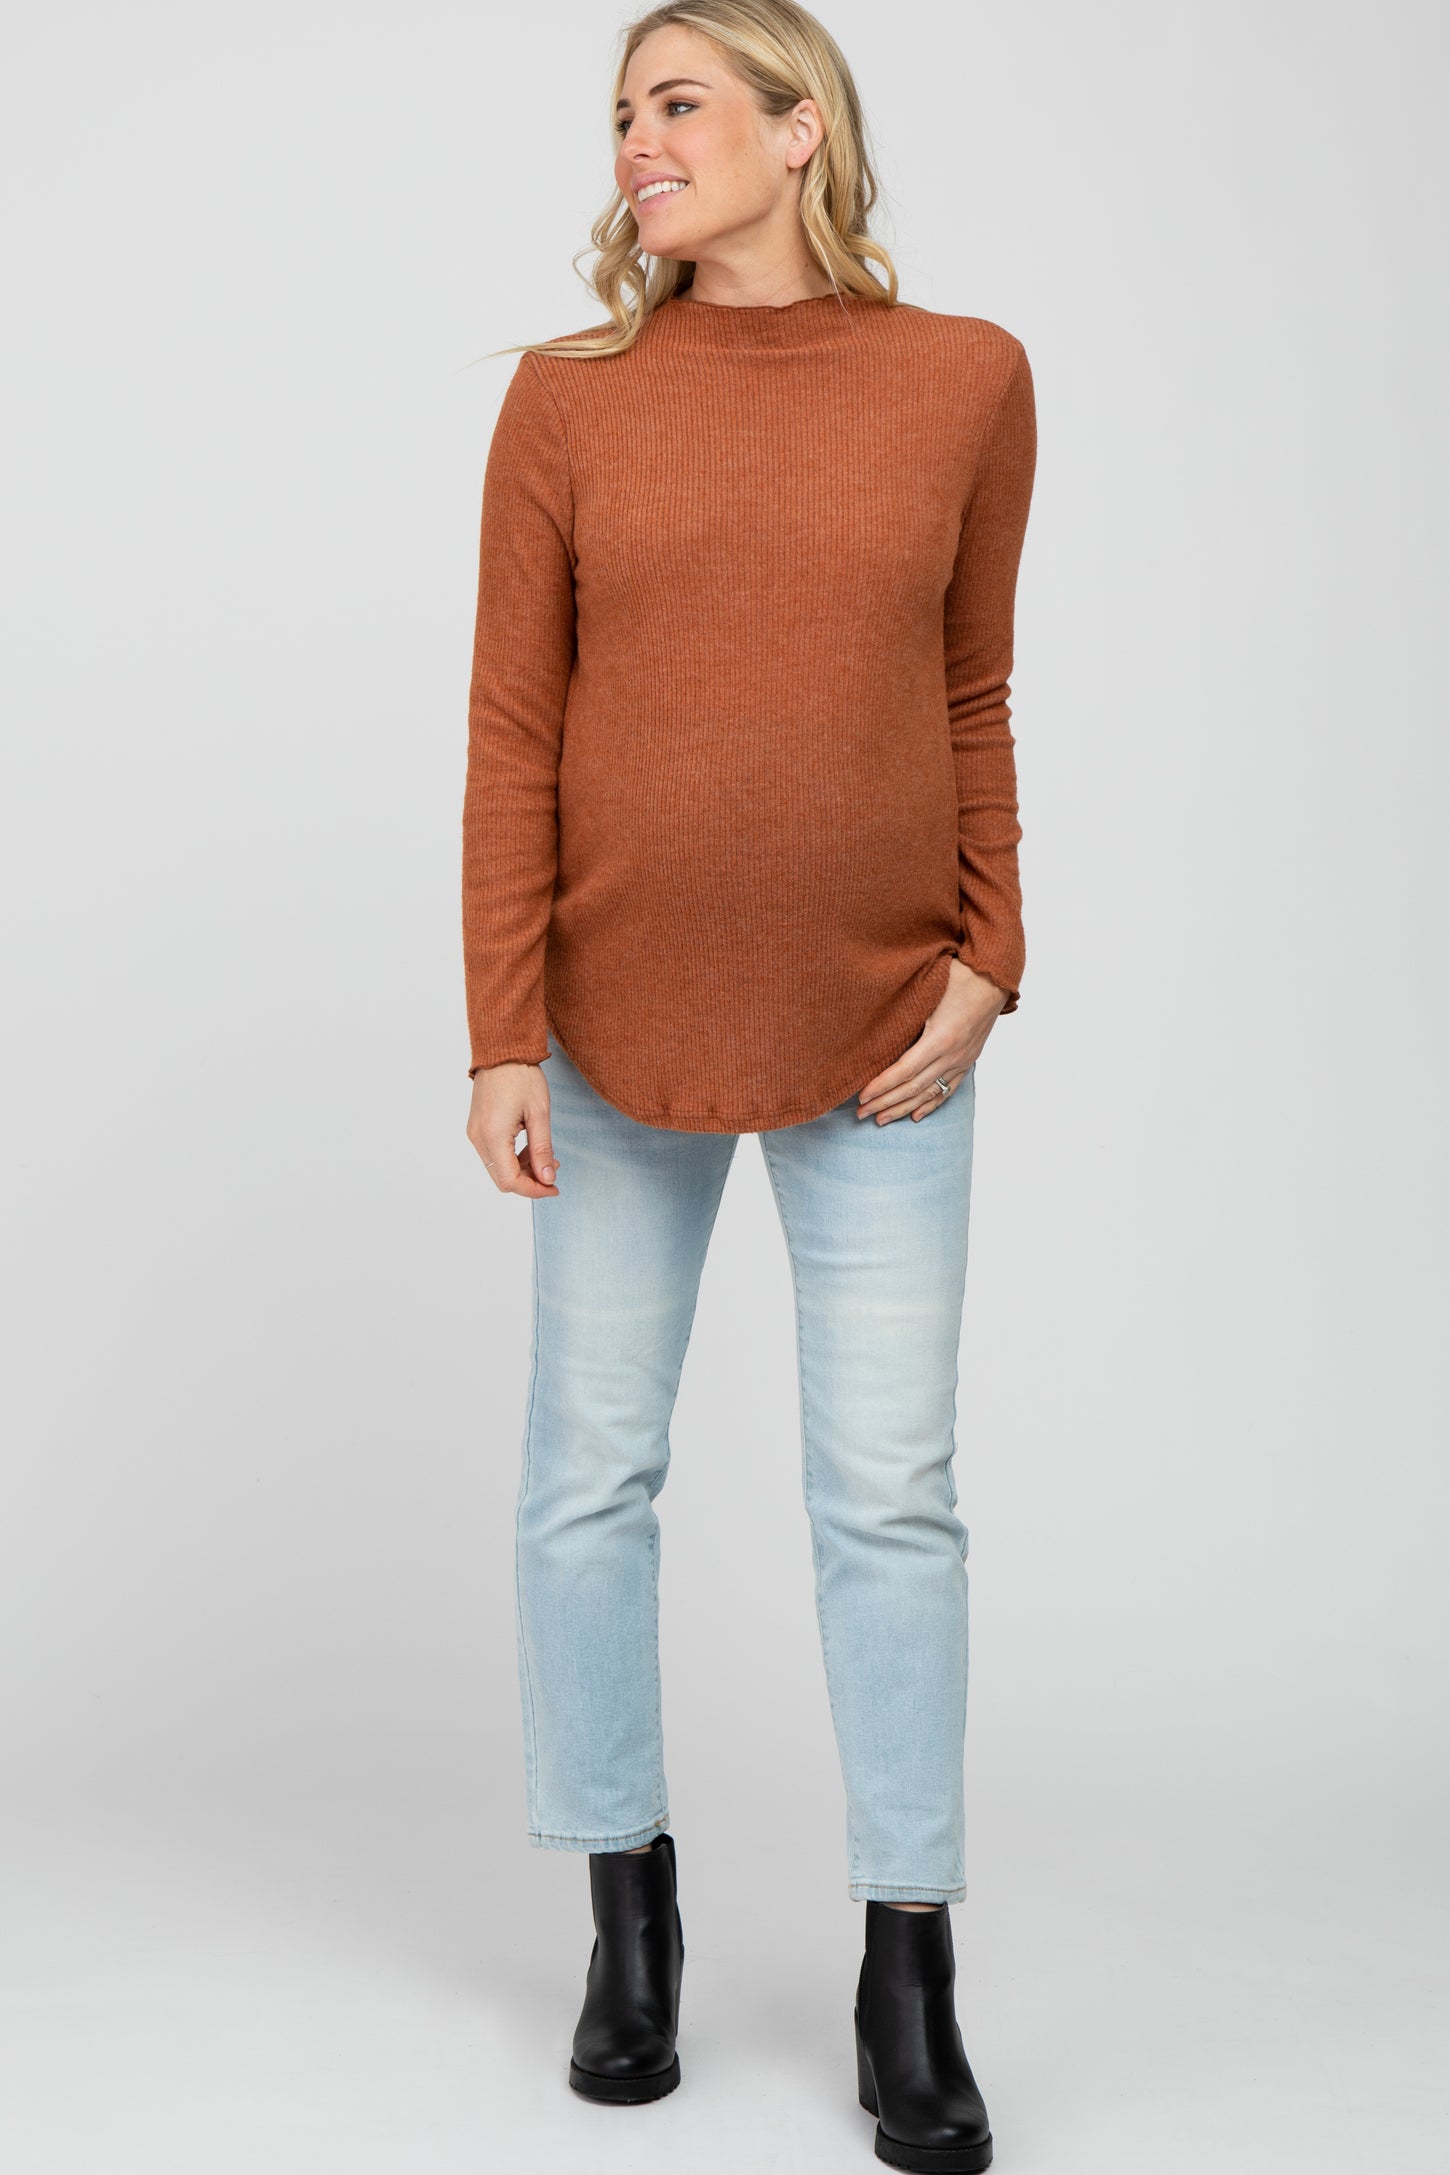 Rust Soft Ribbed Long Sleeve Maternity Top